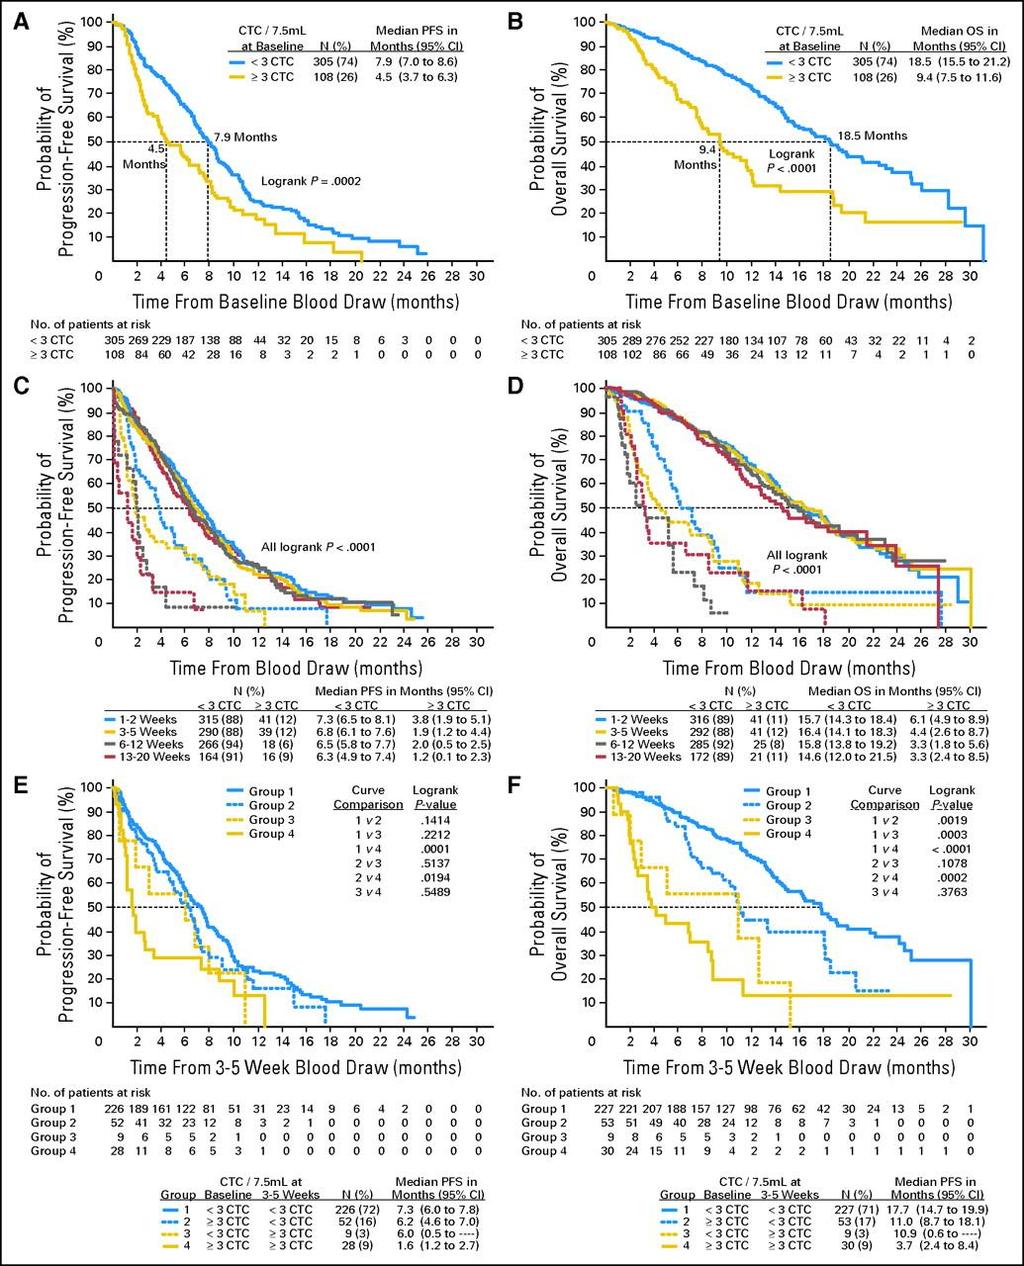 Progression-free survival (PFS) and overall survival (OS) of metastatic colorectal cancer patients with < three and three circulating tumor cells (CTCs) in 7.